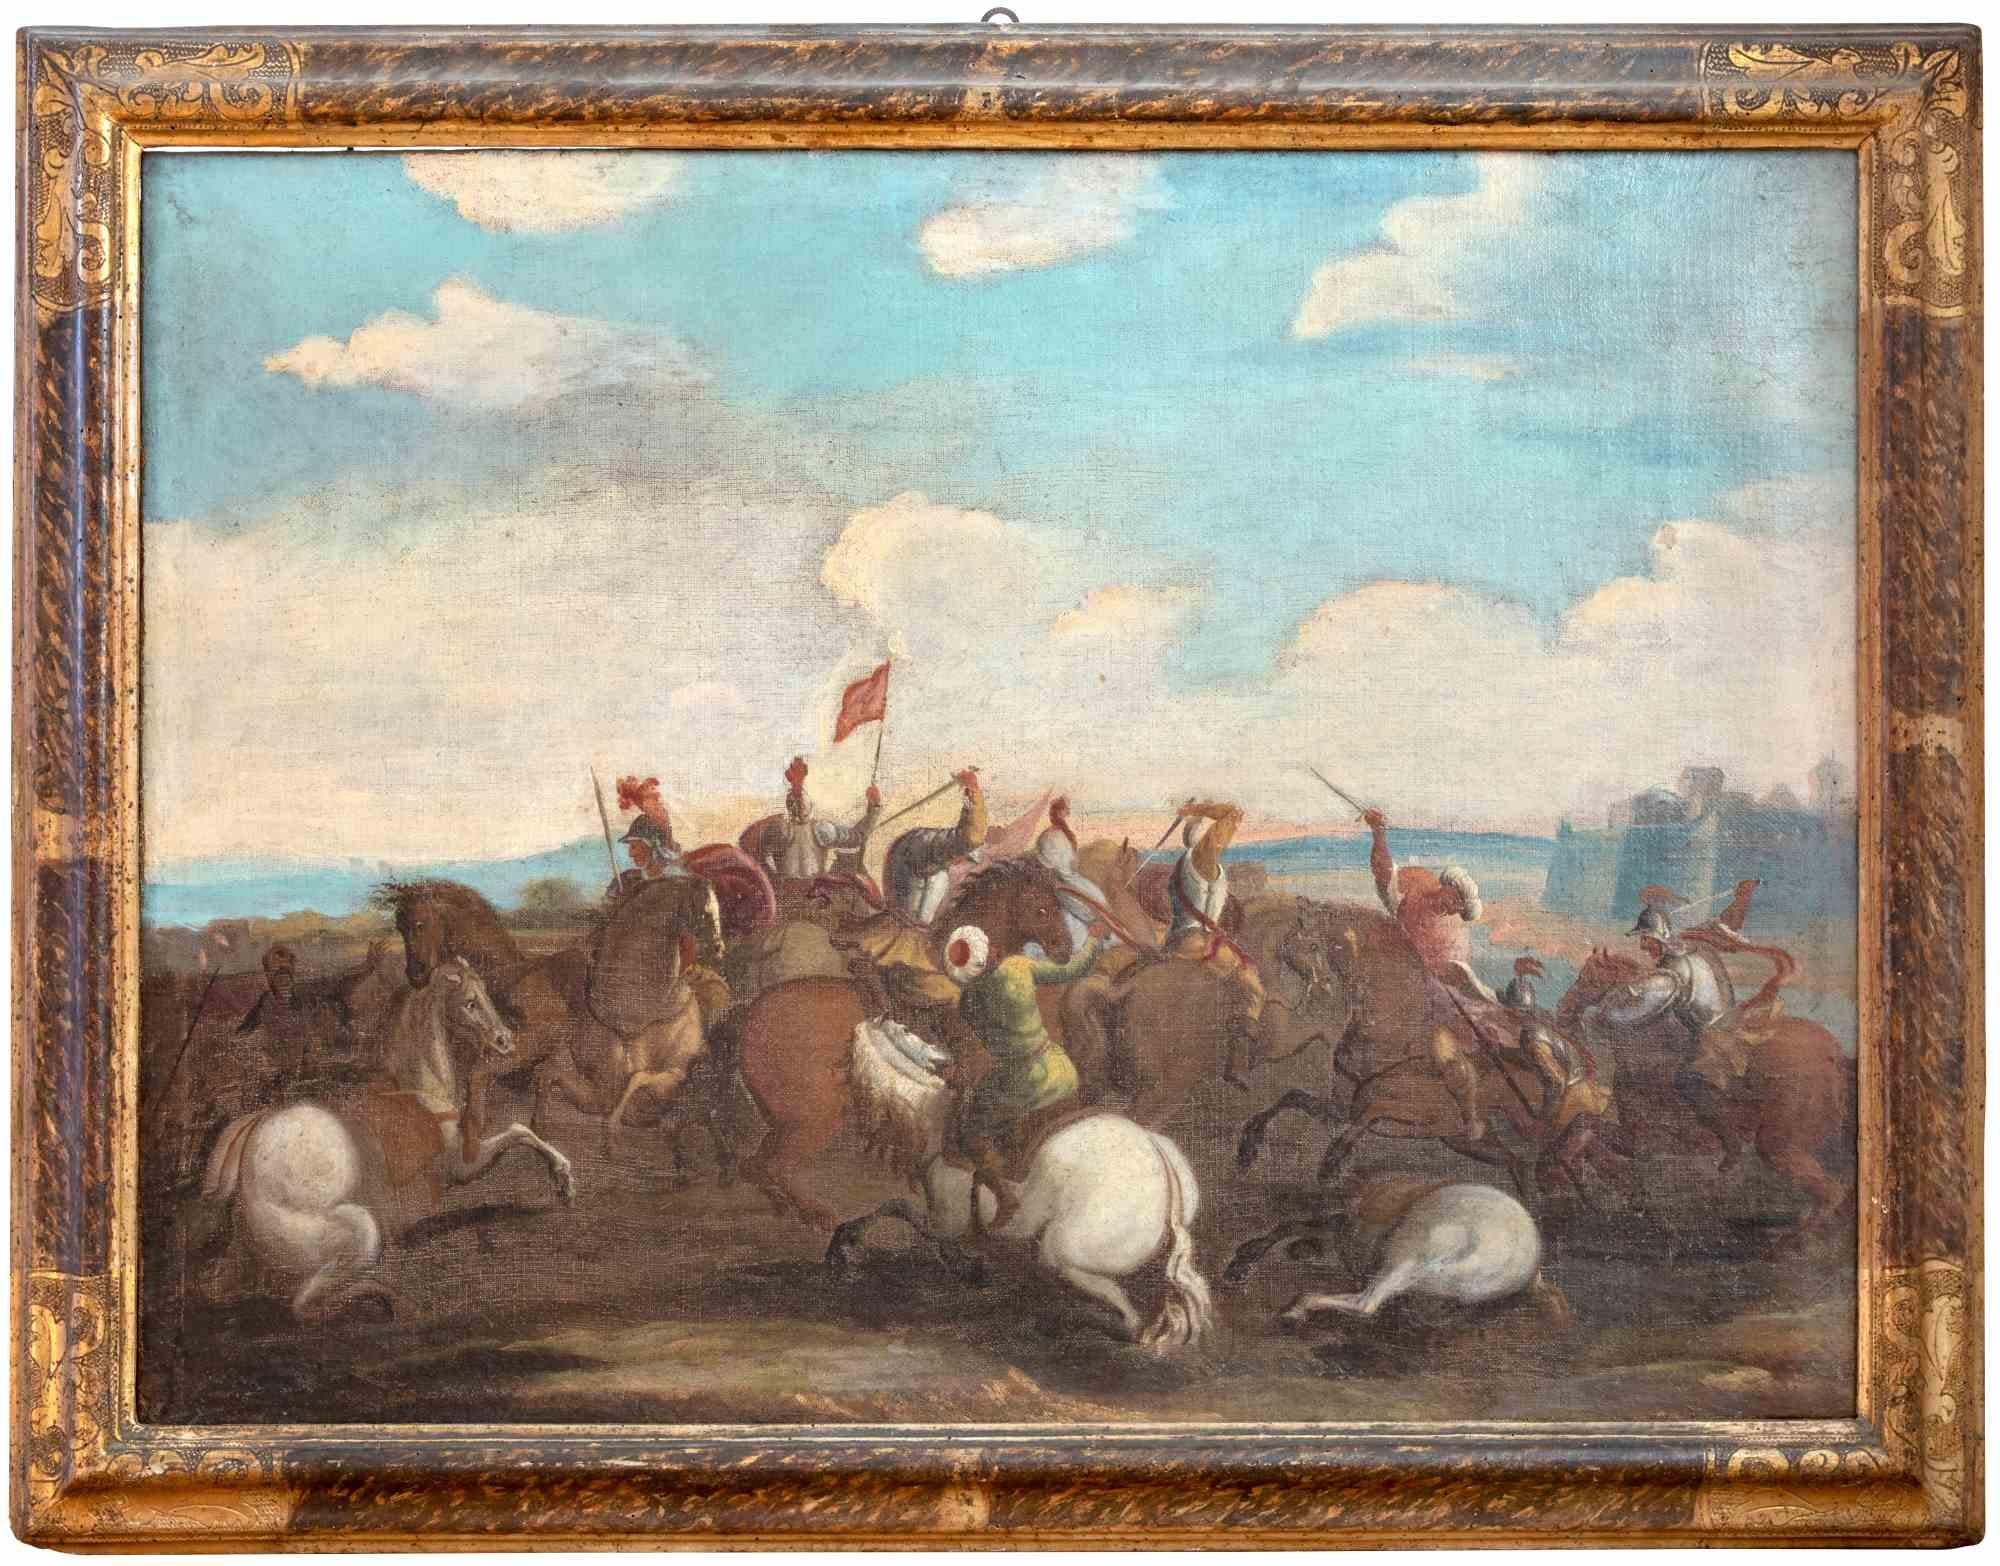 Pair of Battle Scenes - Oil Painting - 18th Century - Brown Figurative Painting by Unknown